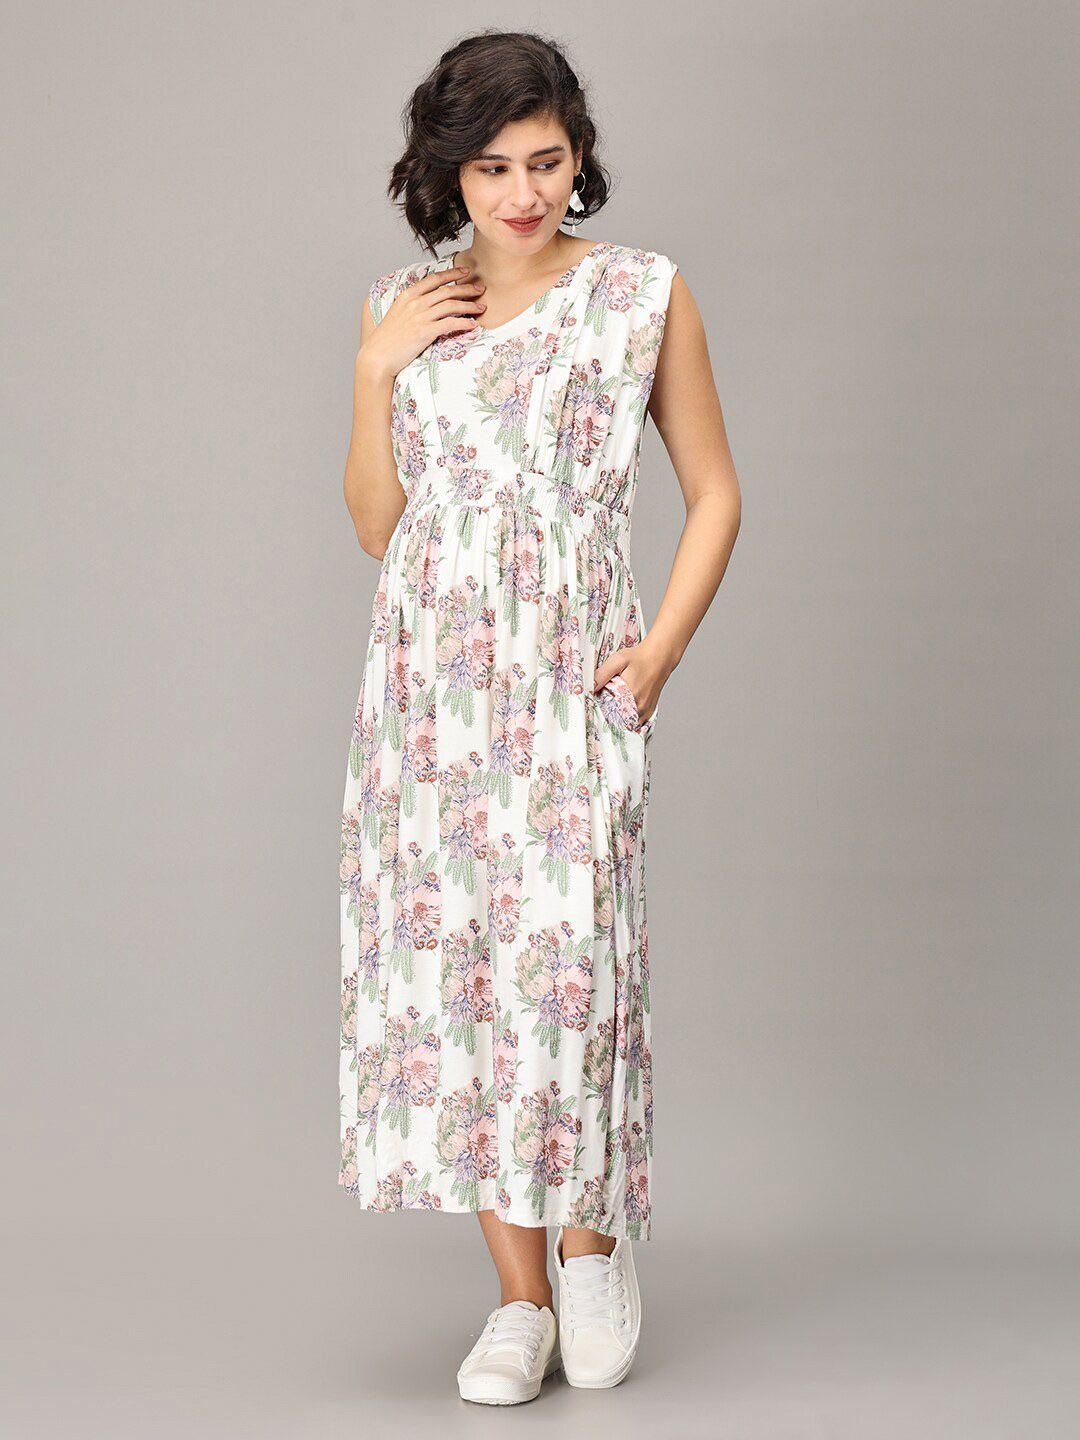 the mom store white floral print maxi dress